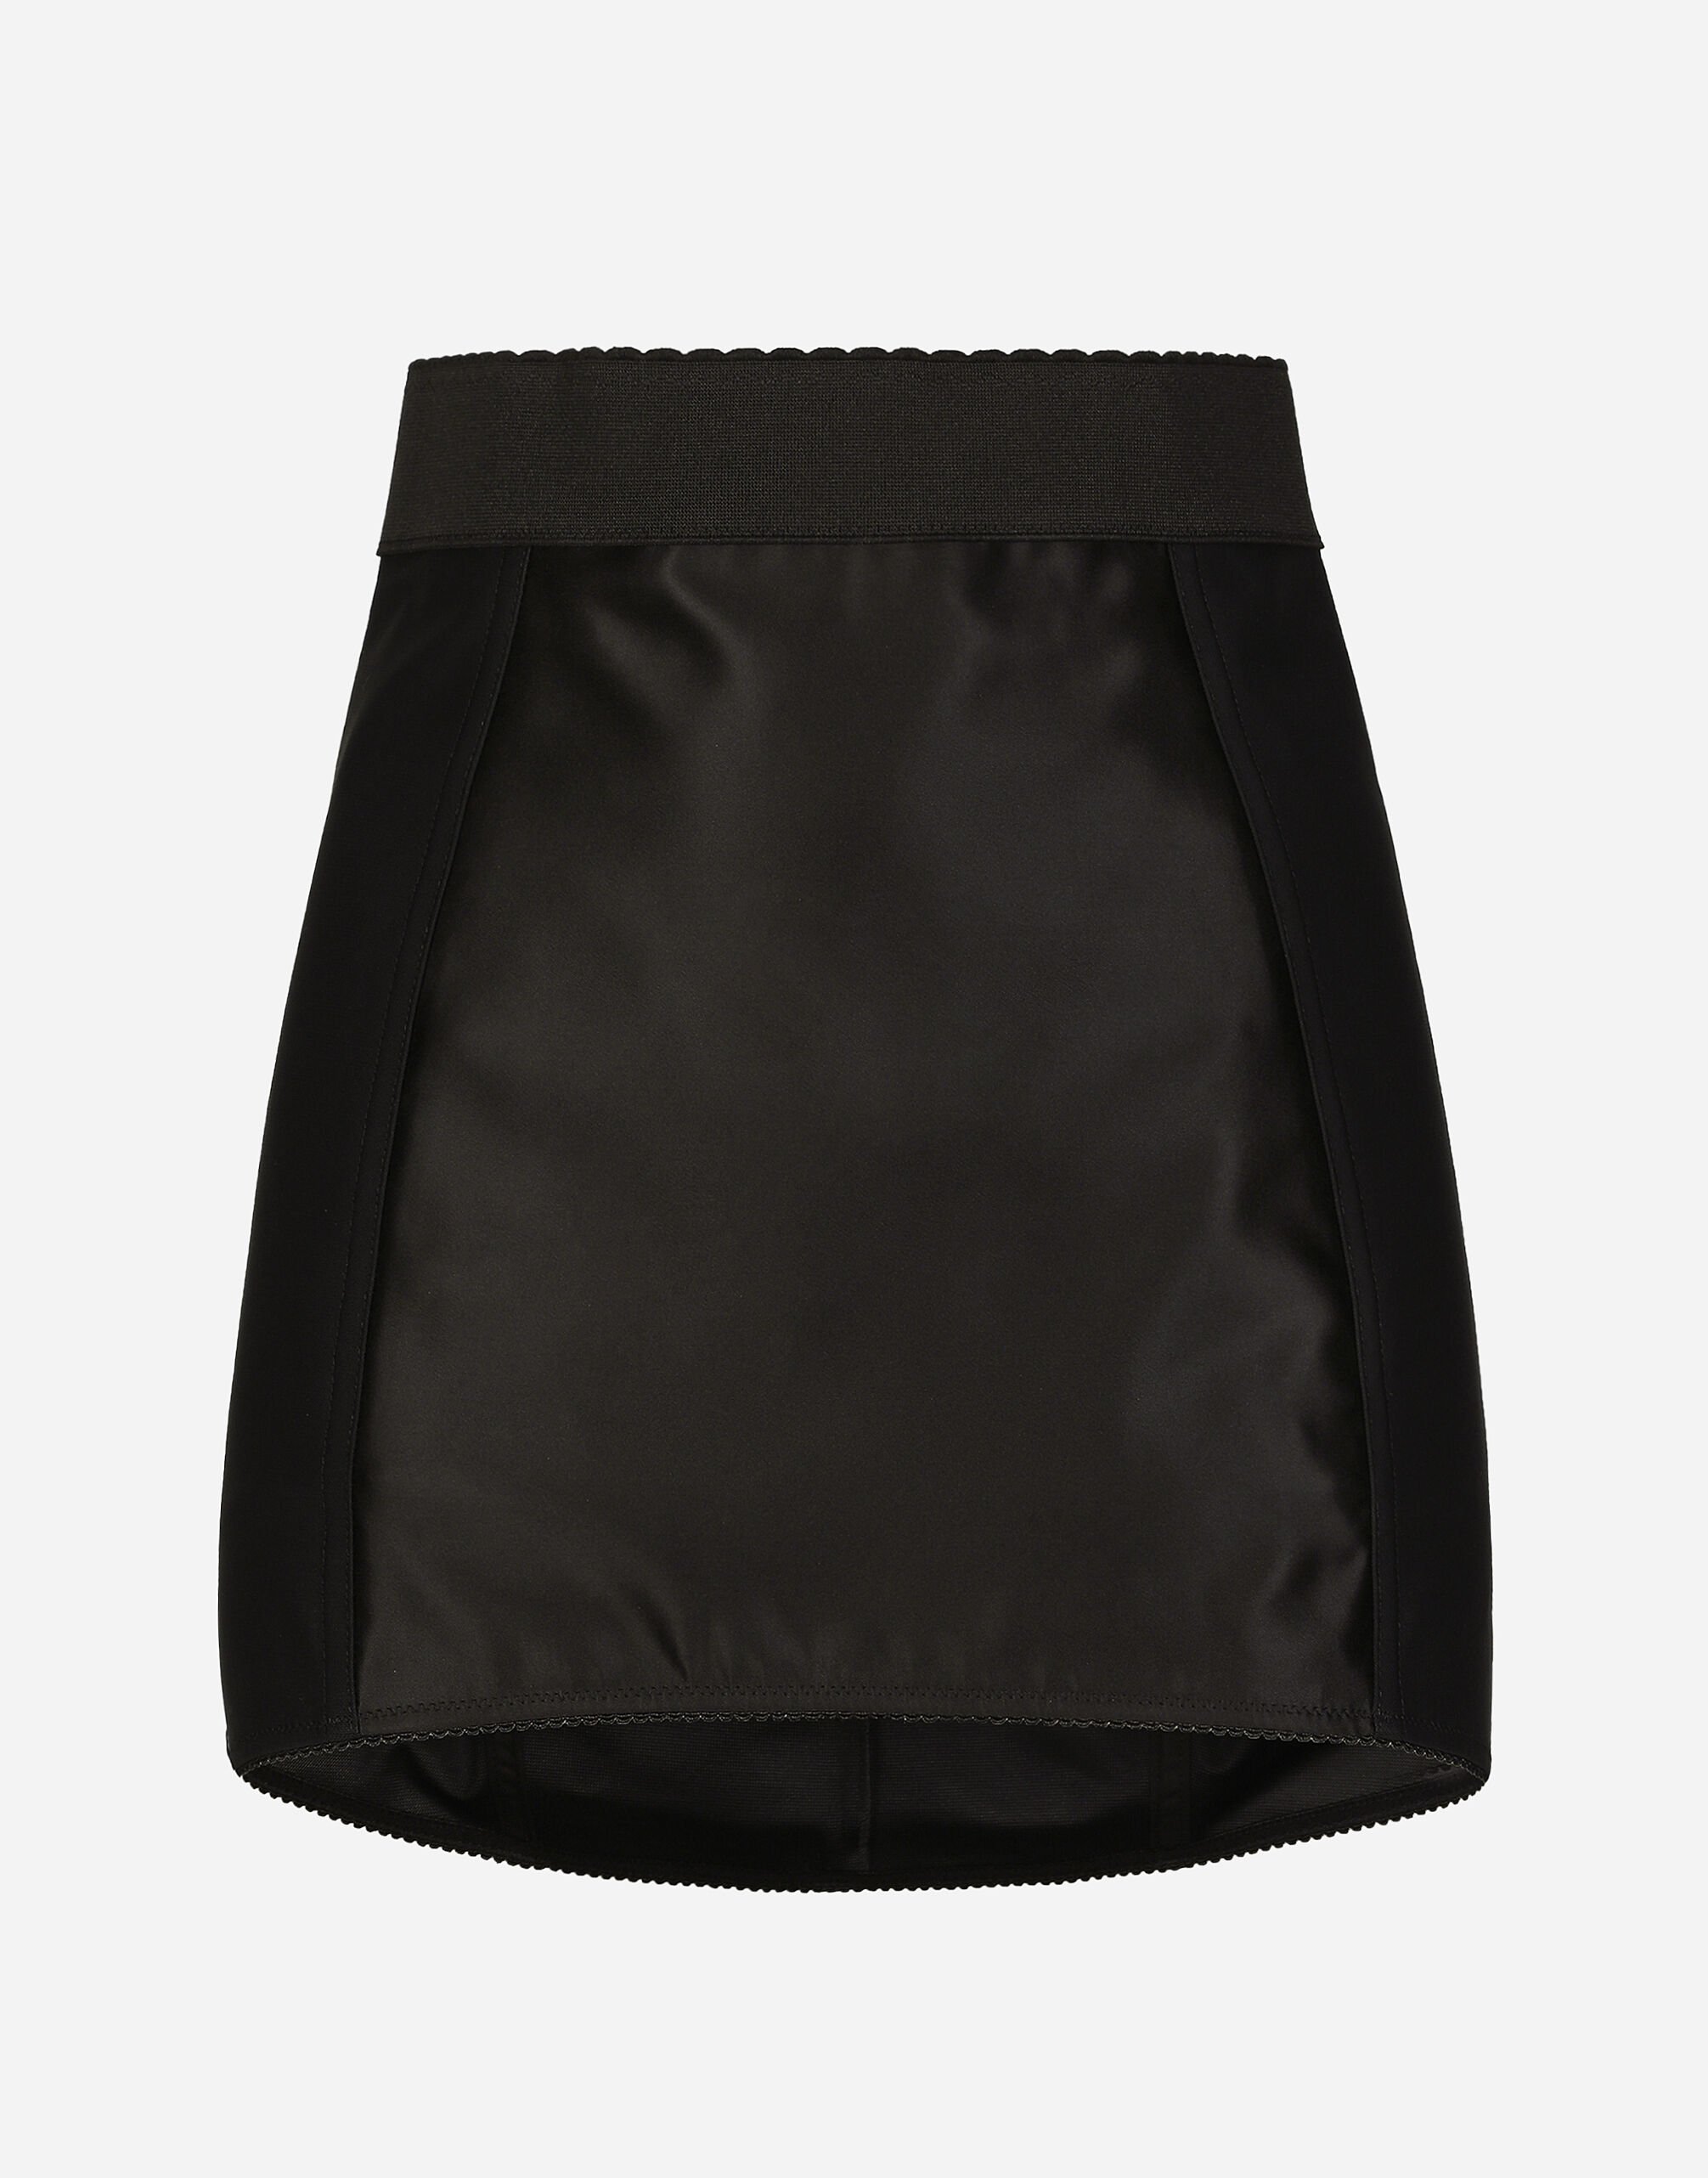 Dolce & Gabbana Marquisette and lace miniskirt with corset details Black FXO05ZJFMBC